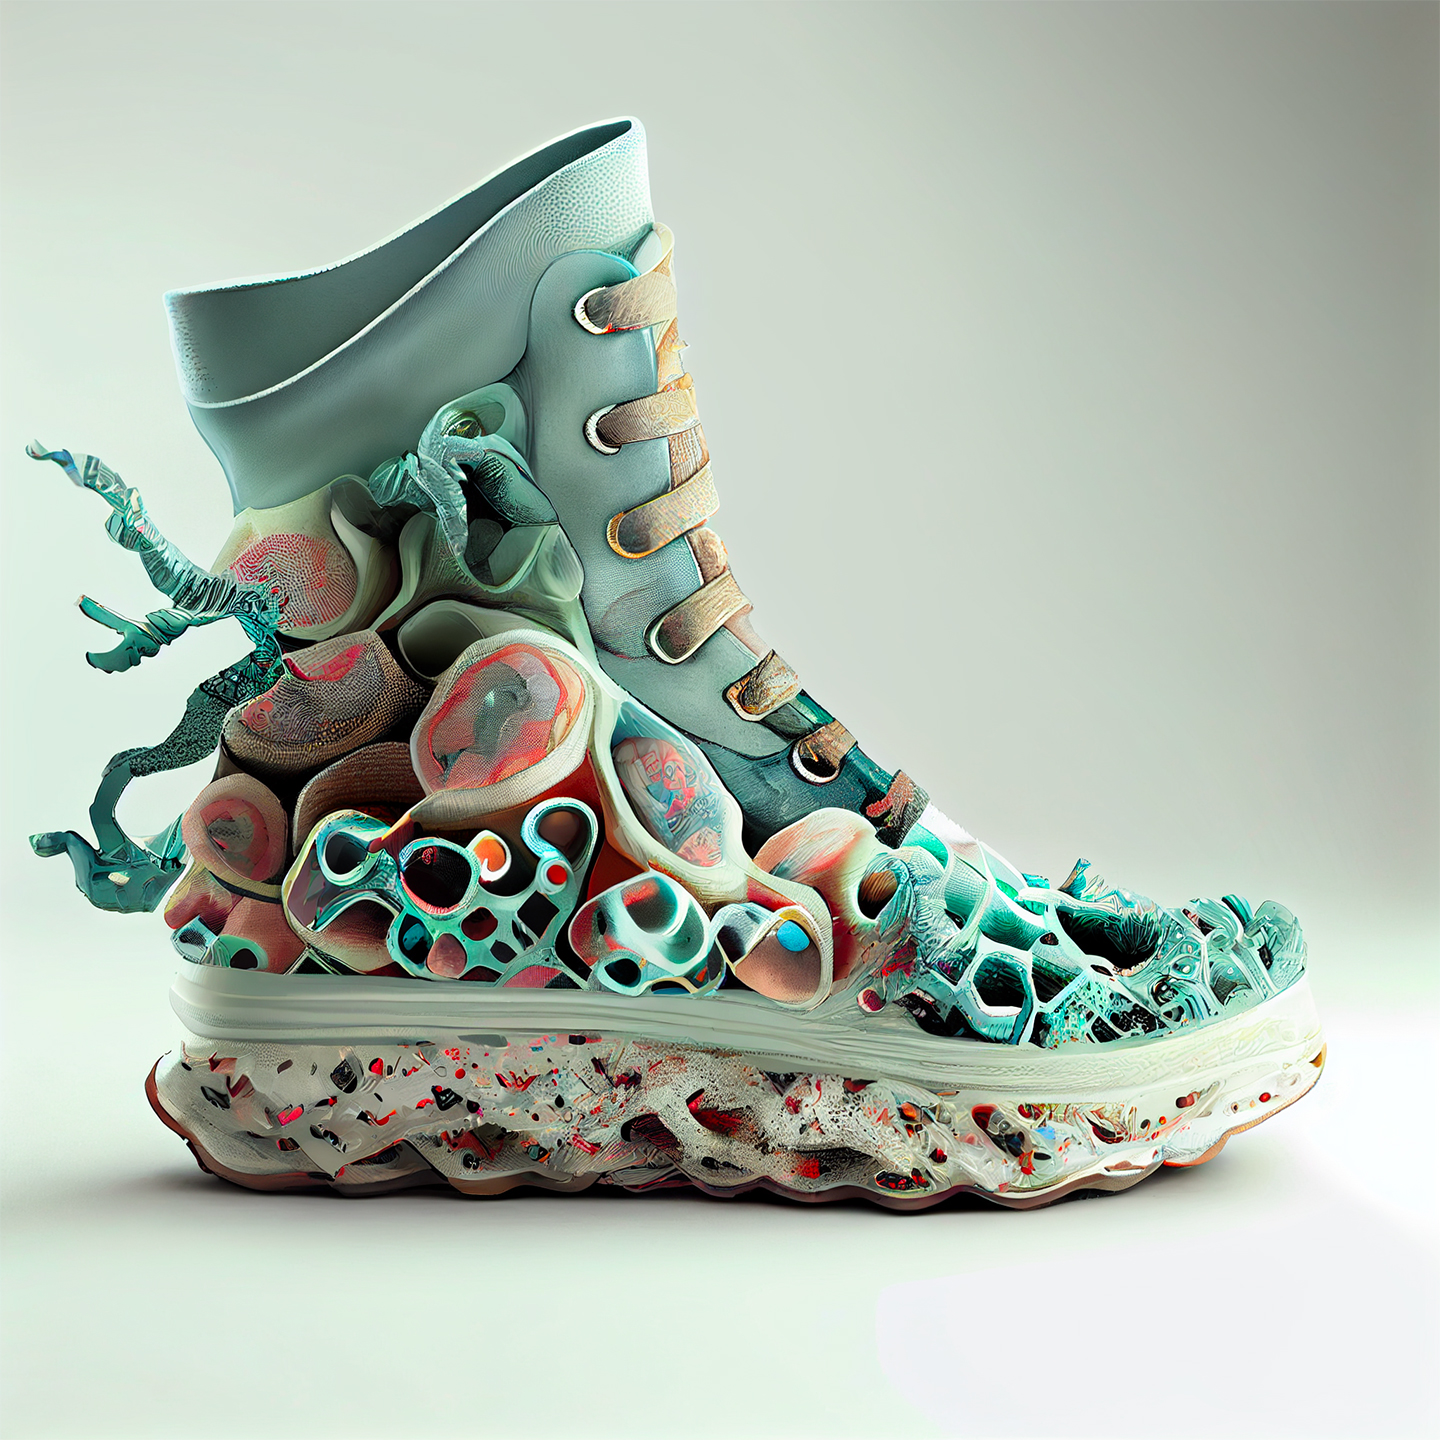 Shoe design for mould and spore sneakers, imagined by Lorenzo Bustillos using artificial intelligence © Courtesy of the author